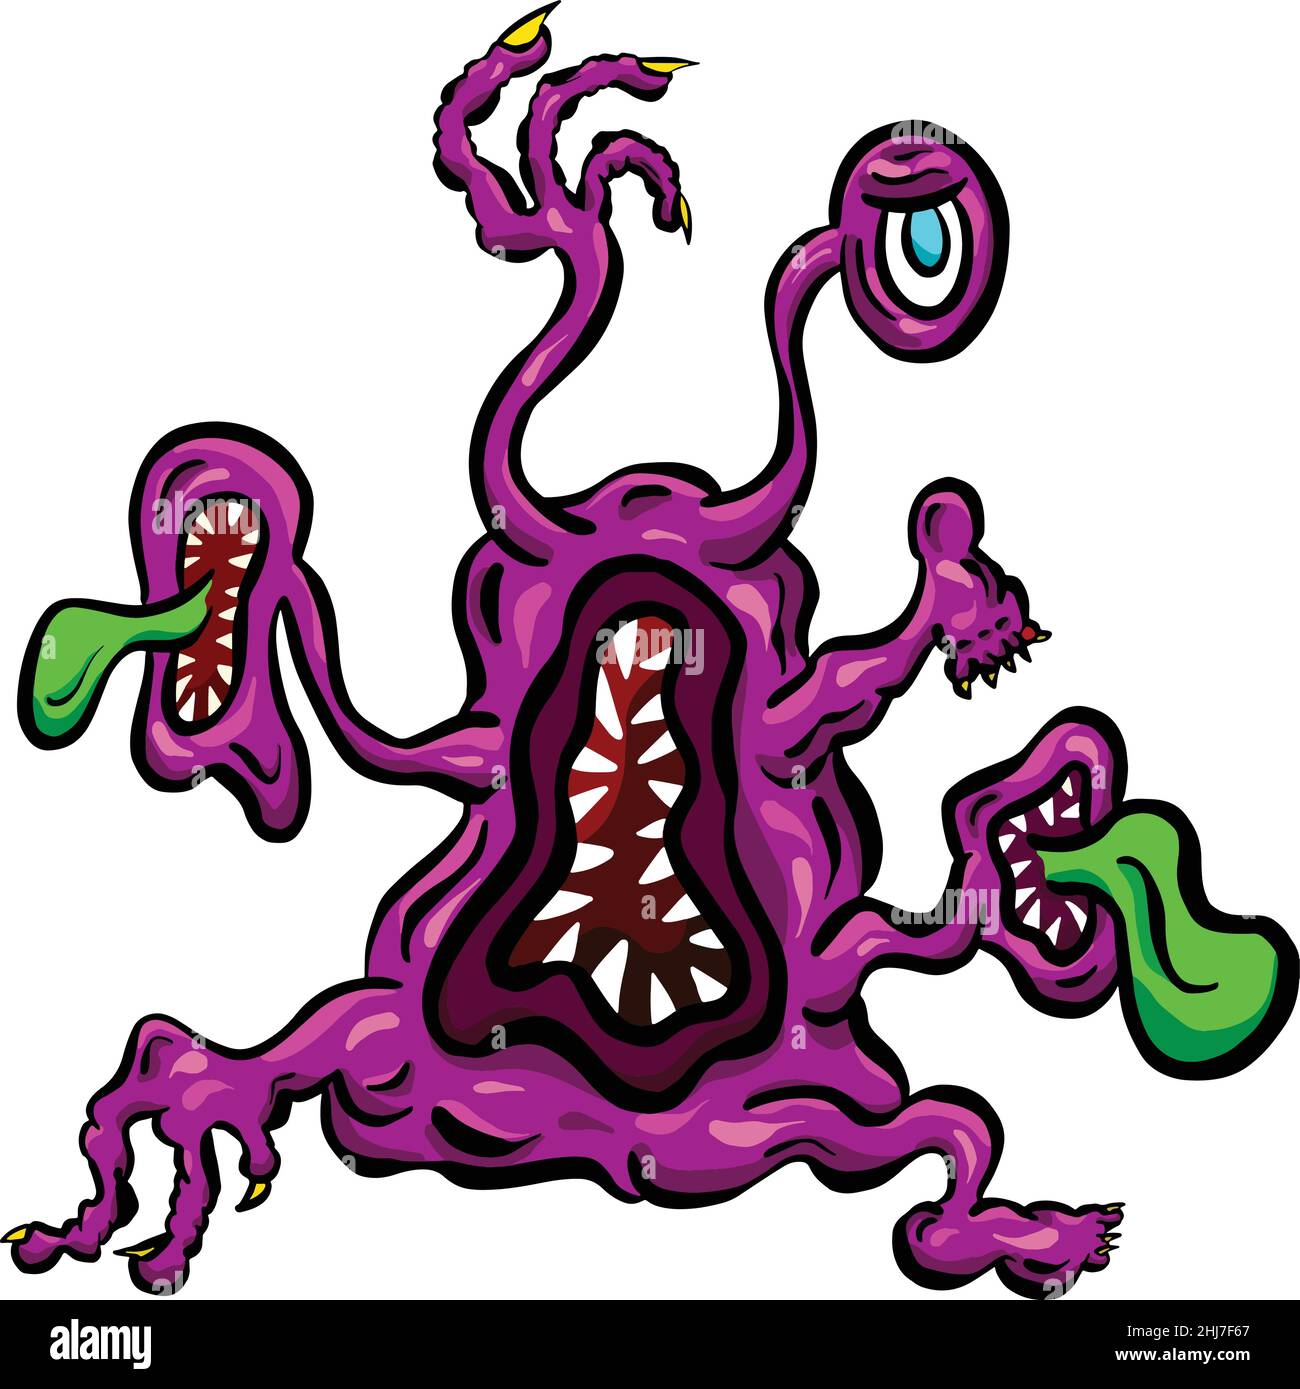 Weird Imaginary Alien Monster Creatures that Look Like Viruses or Parasites in a Cartoon Style Stock Vector